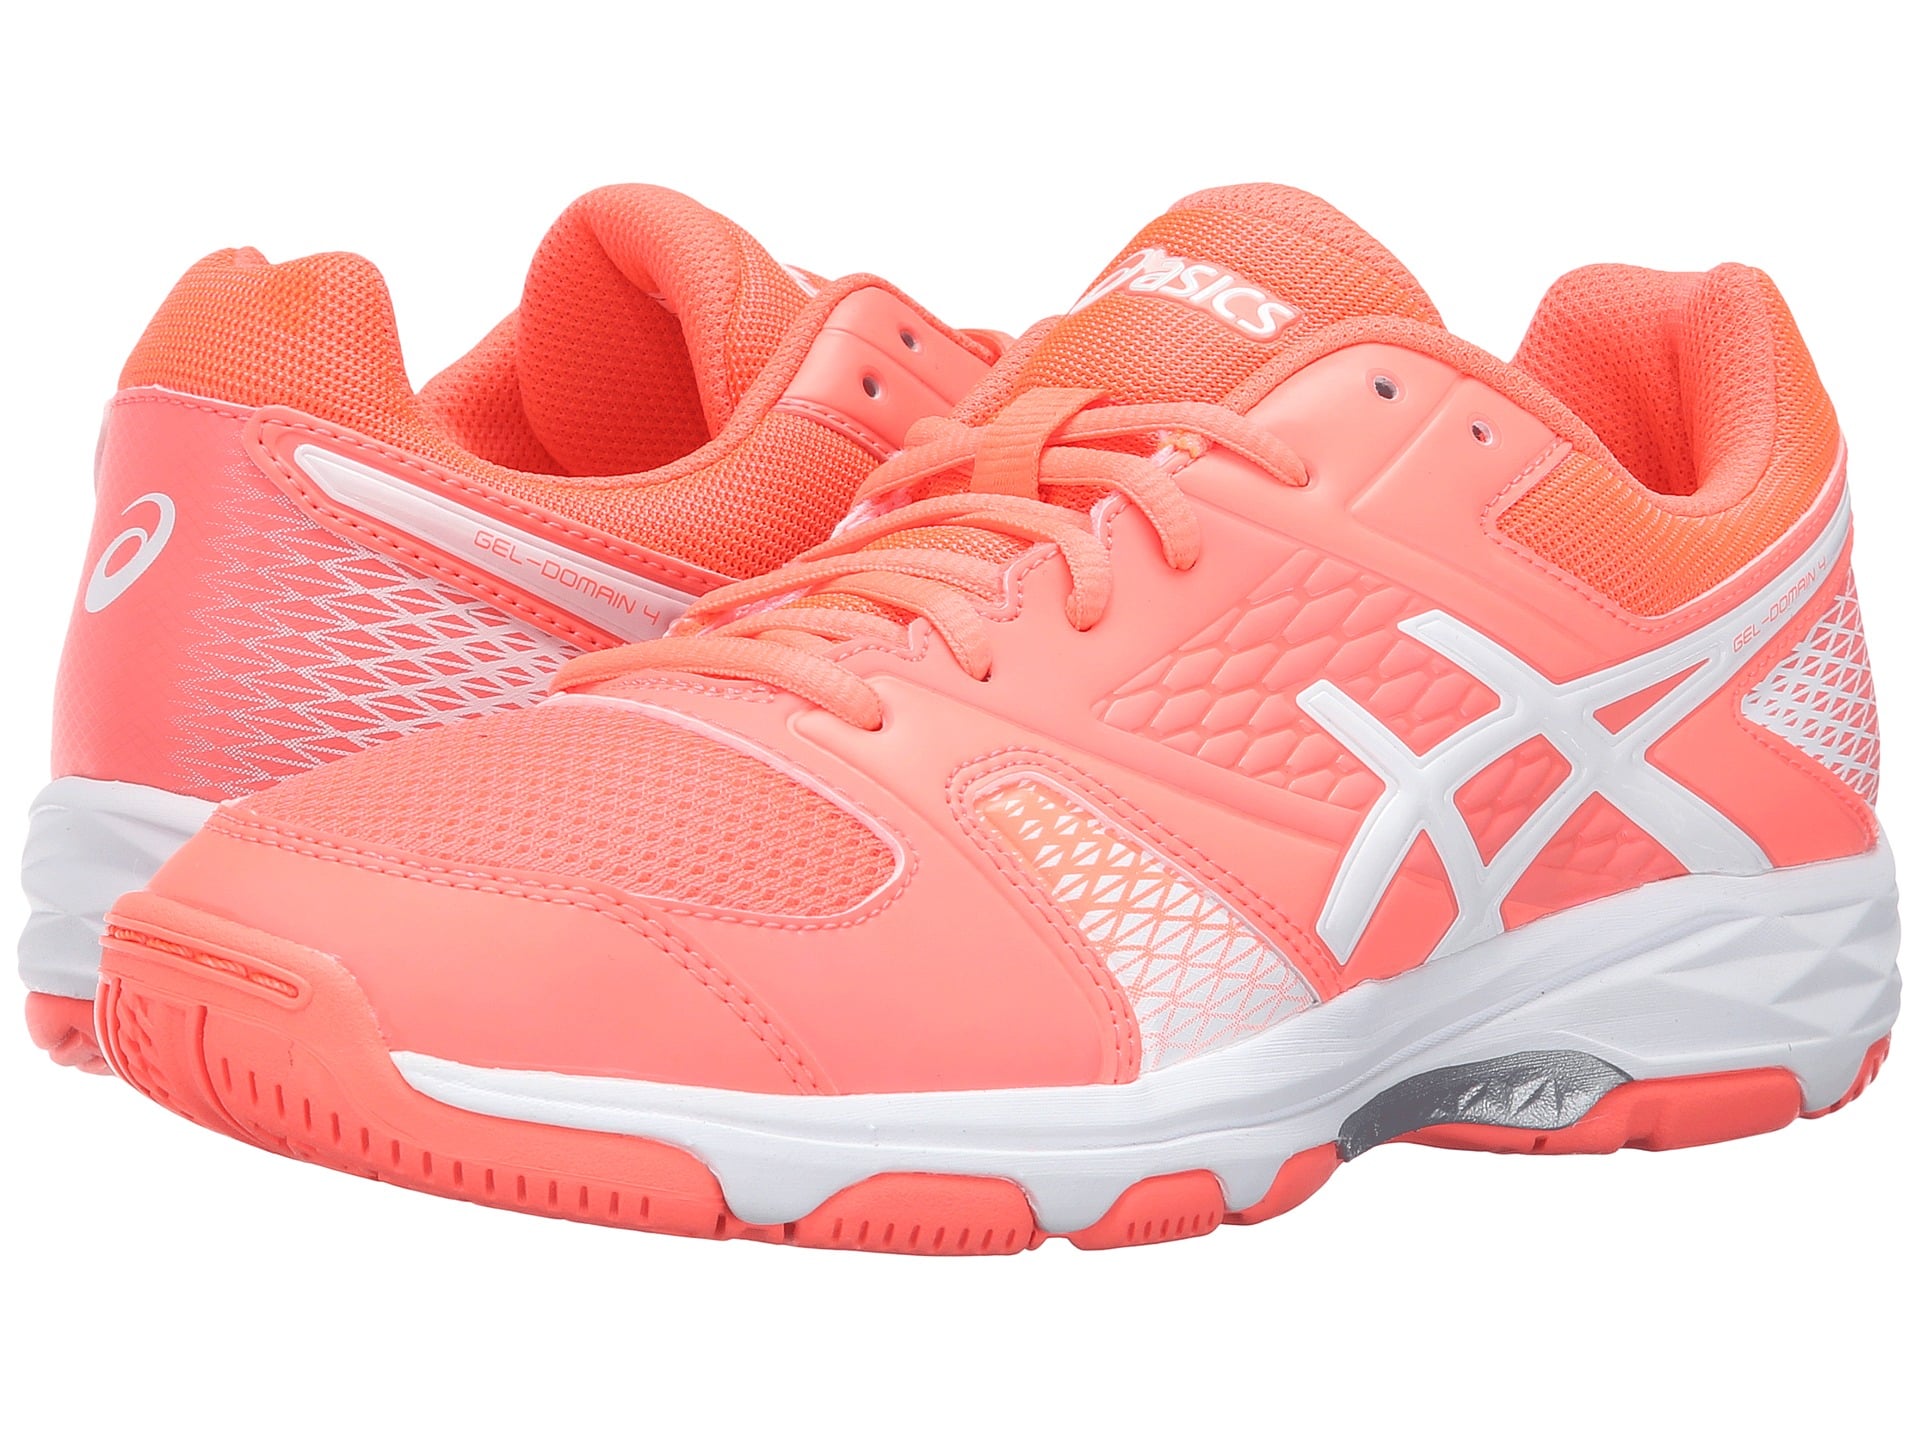 Asics Gel-Domain 4 | 10 Cute Sneakers in Season's Hottest Color, Coral | POPSUGAR Fitness Photo 3